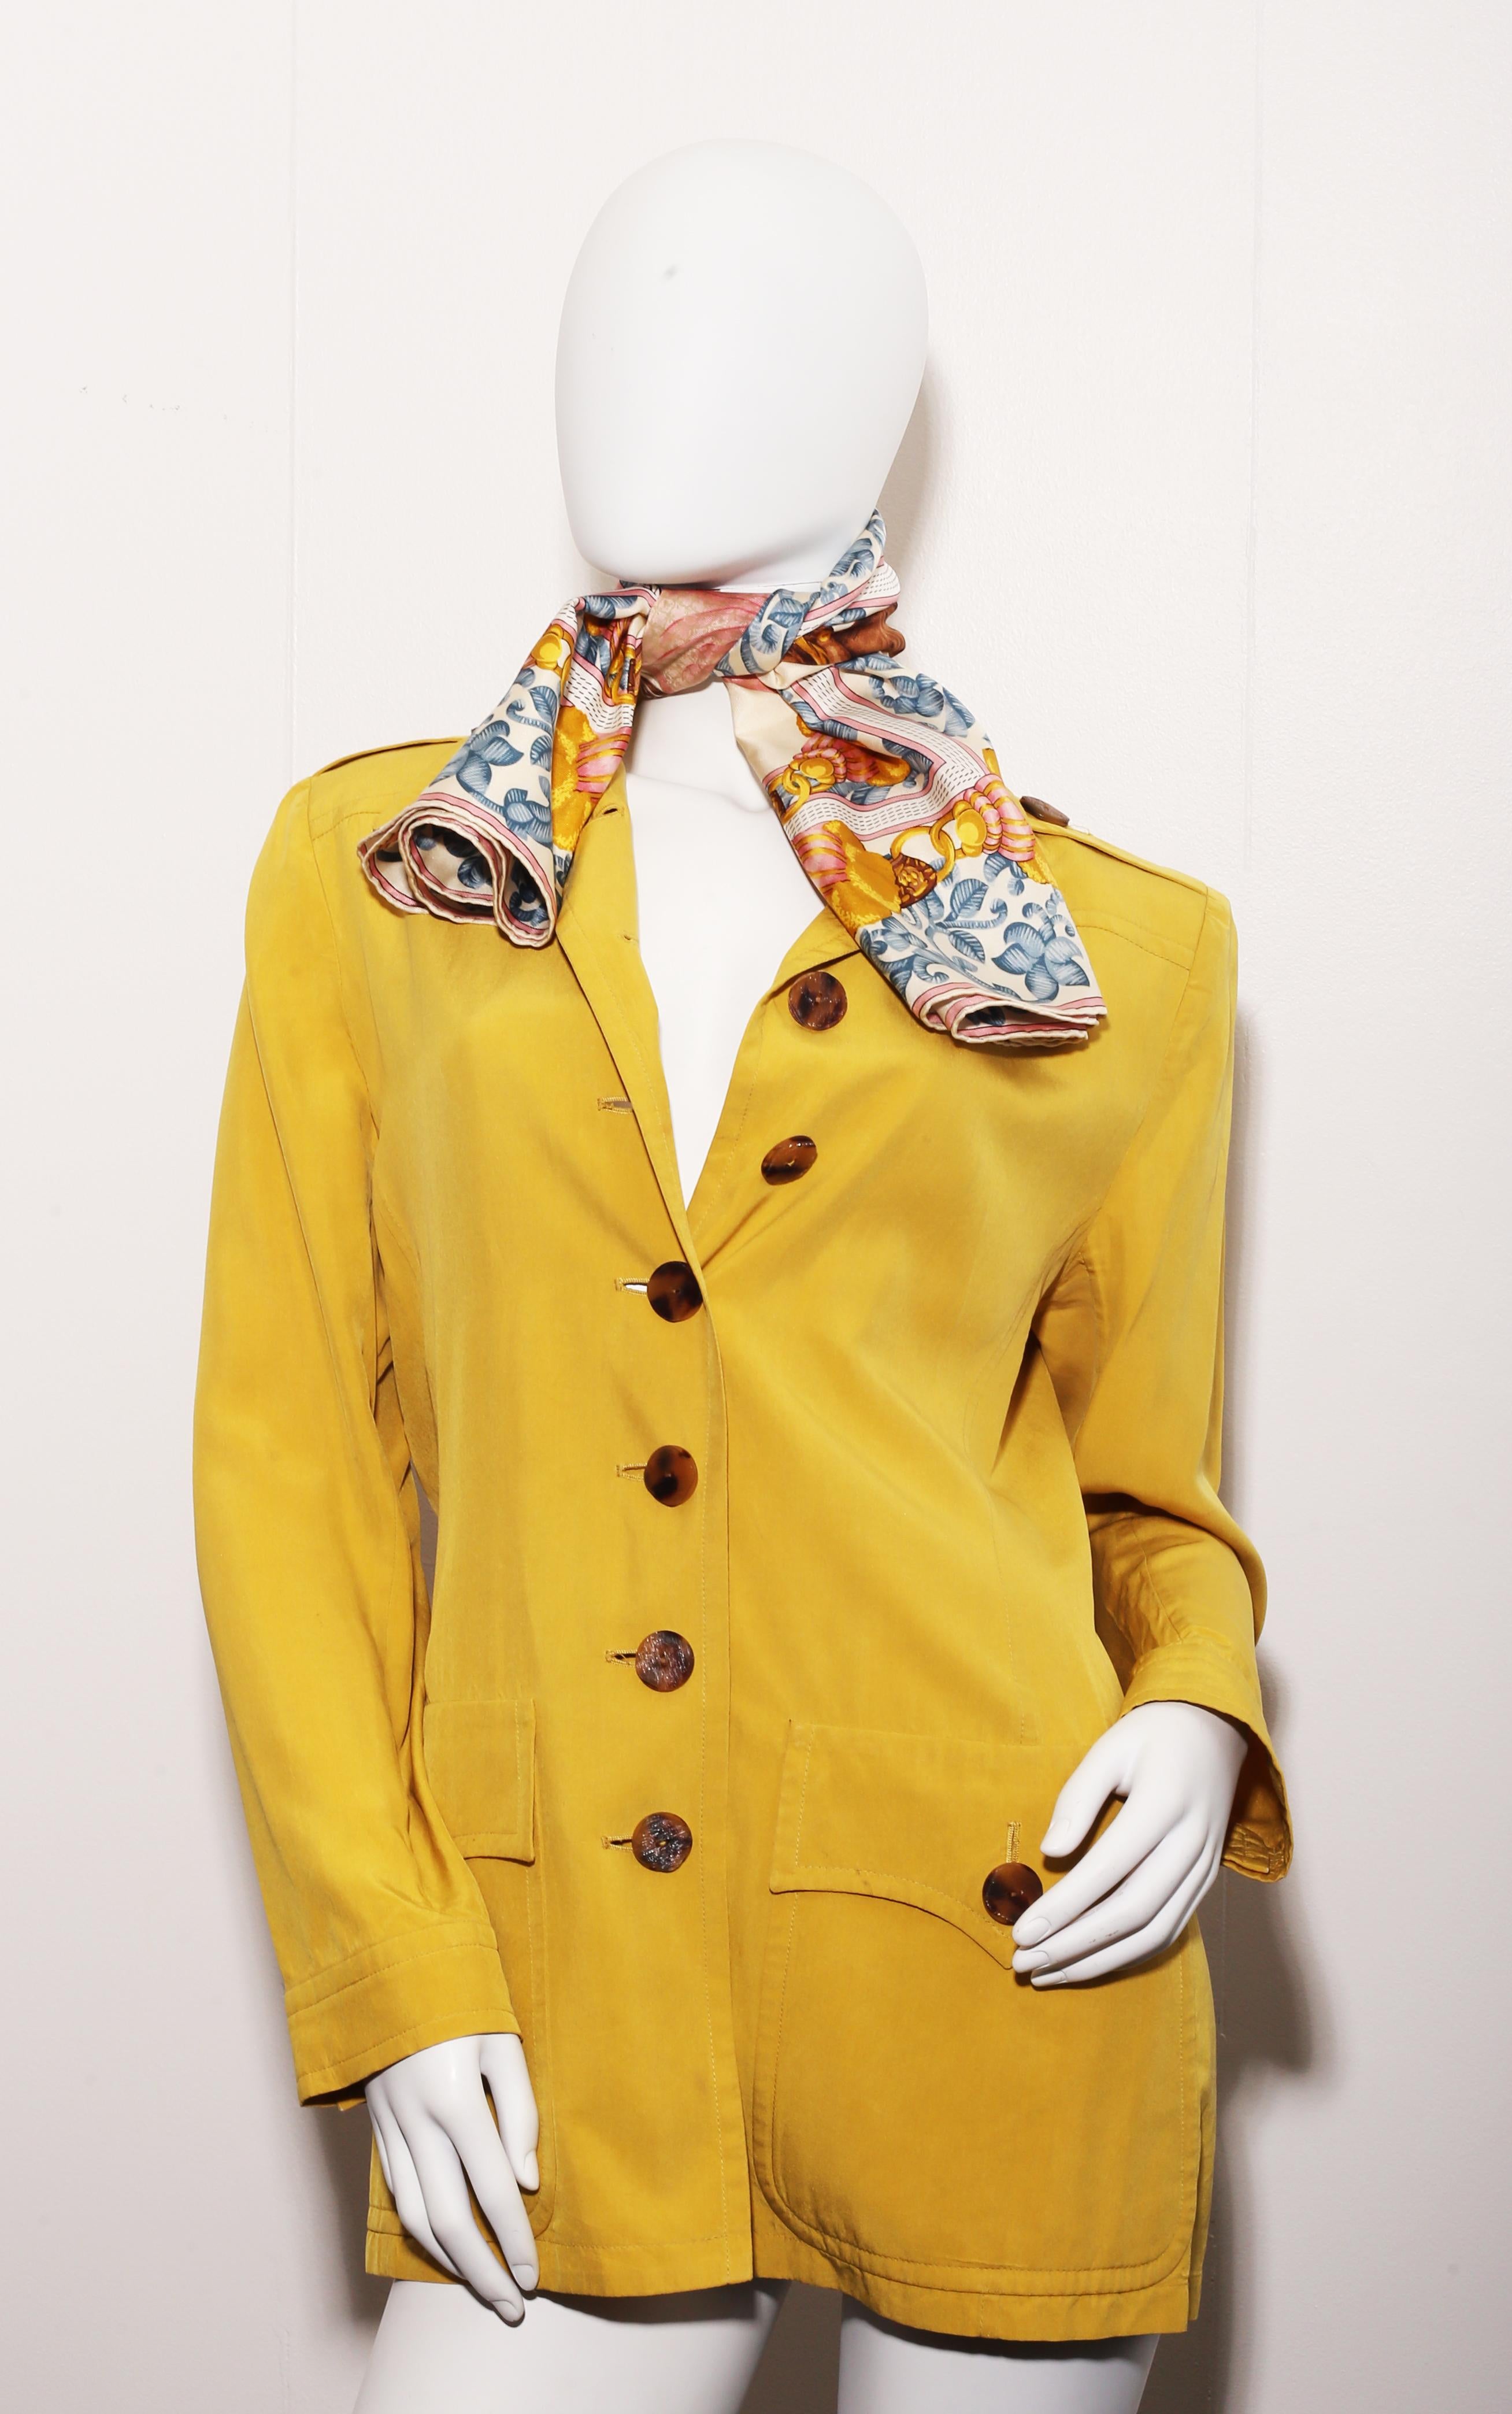 Yves Saint Laurent Rive Gauche pale chartreuseSafari  jacket,circa 1990
brushed cotton,  safari jacket with epaulettes and wood buttons. 
This jacket may be worn in a number of ways and styled to your liking. Easily dress this piece up or down, it